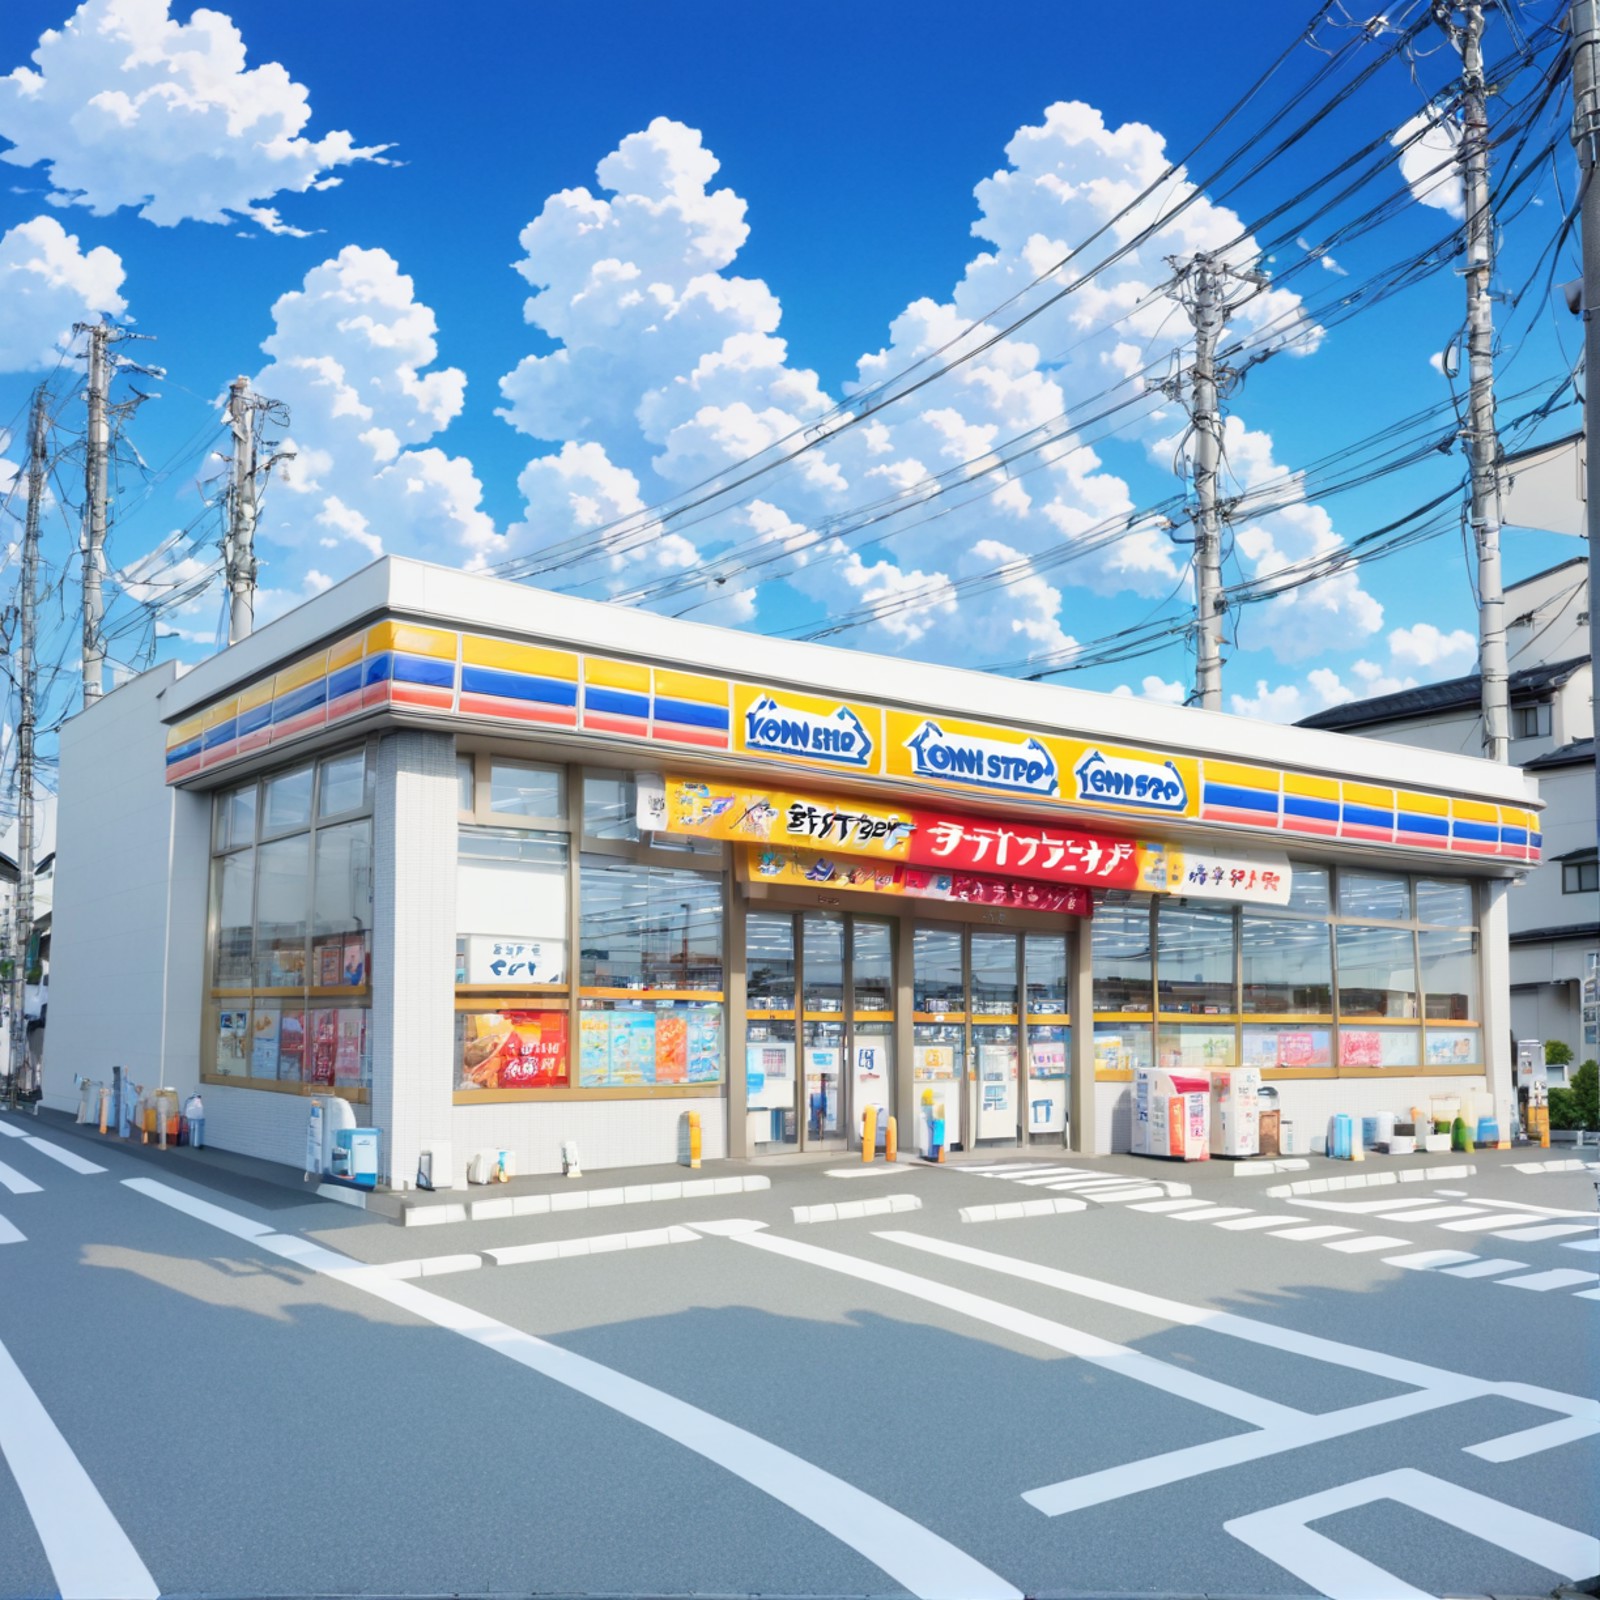 masterpiece, best quality, ultra-detailed, illustration,
ministop, konbini, scenery, storefront, japan, cloud, outdoors, s...